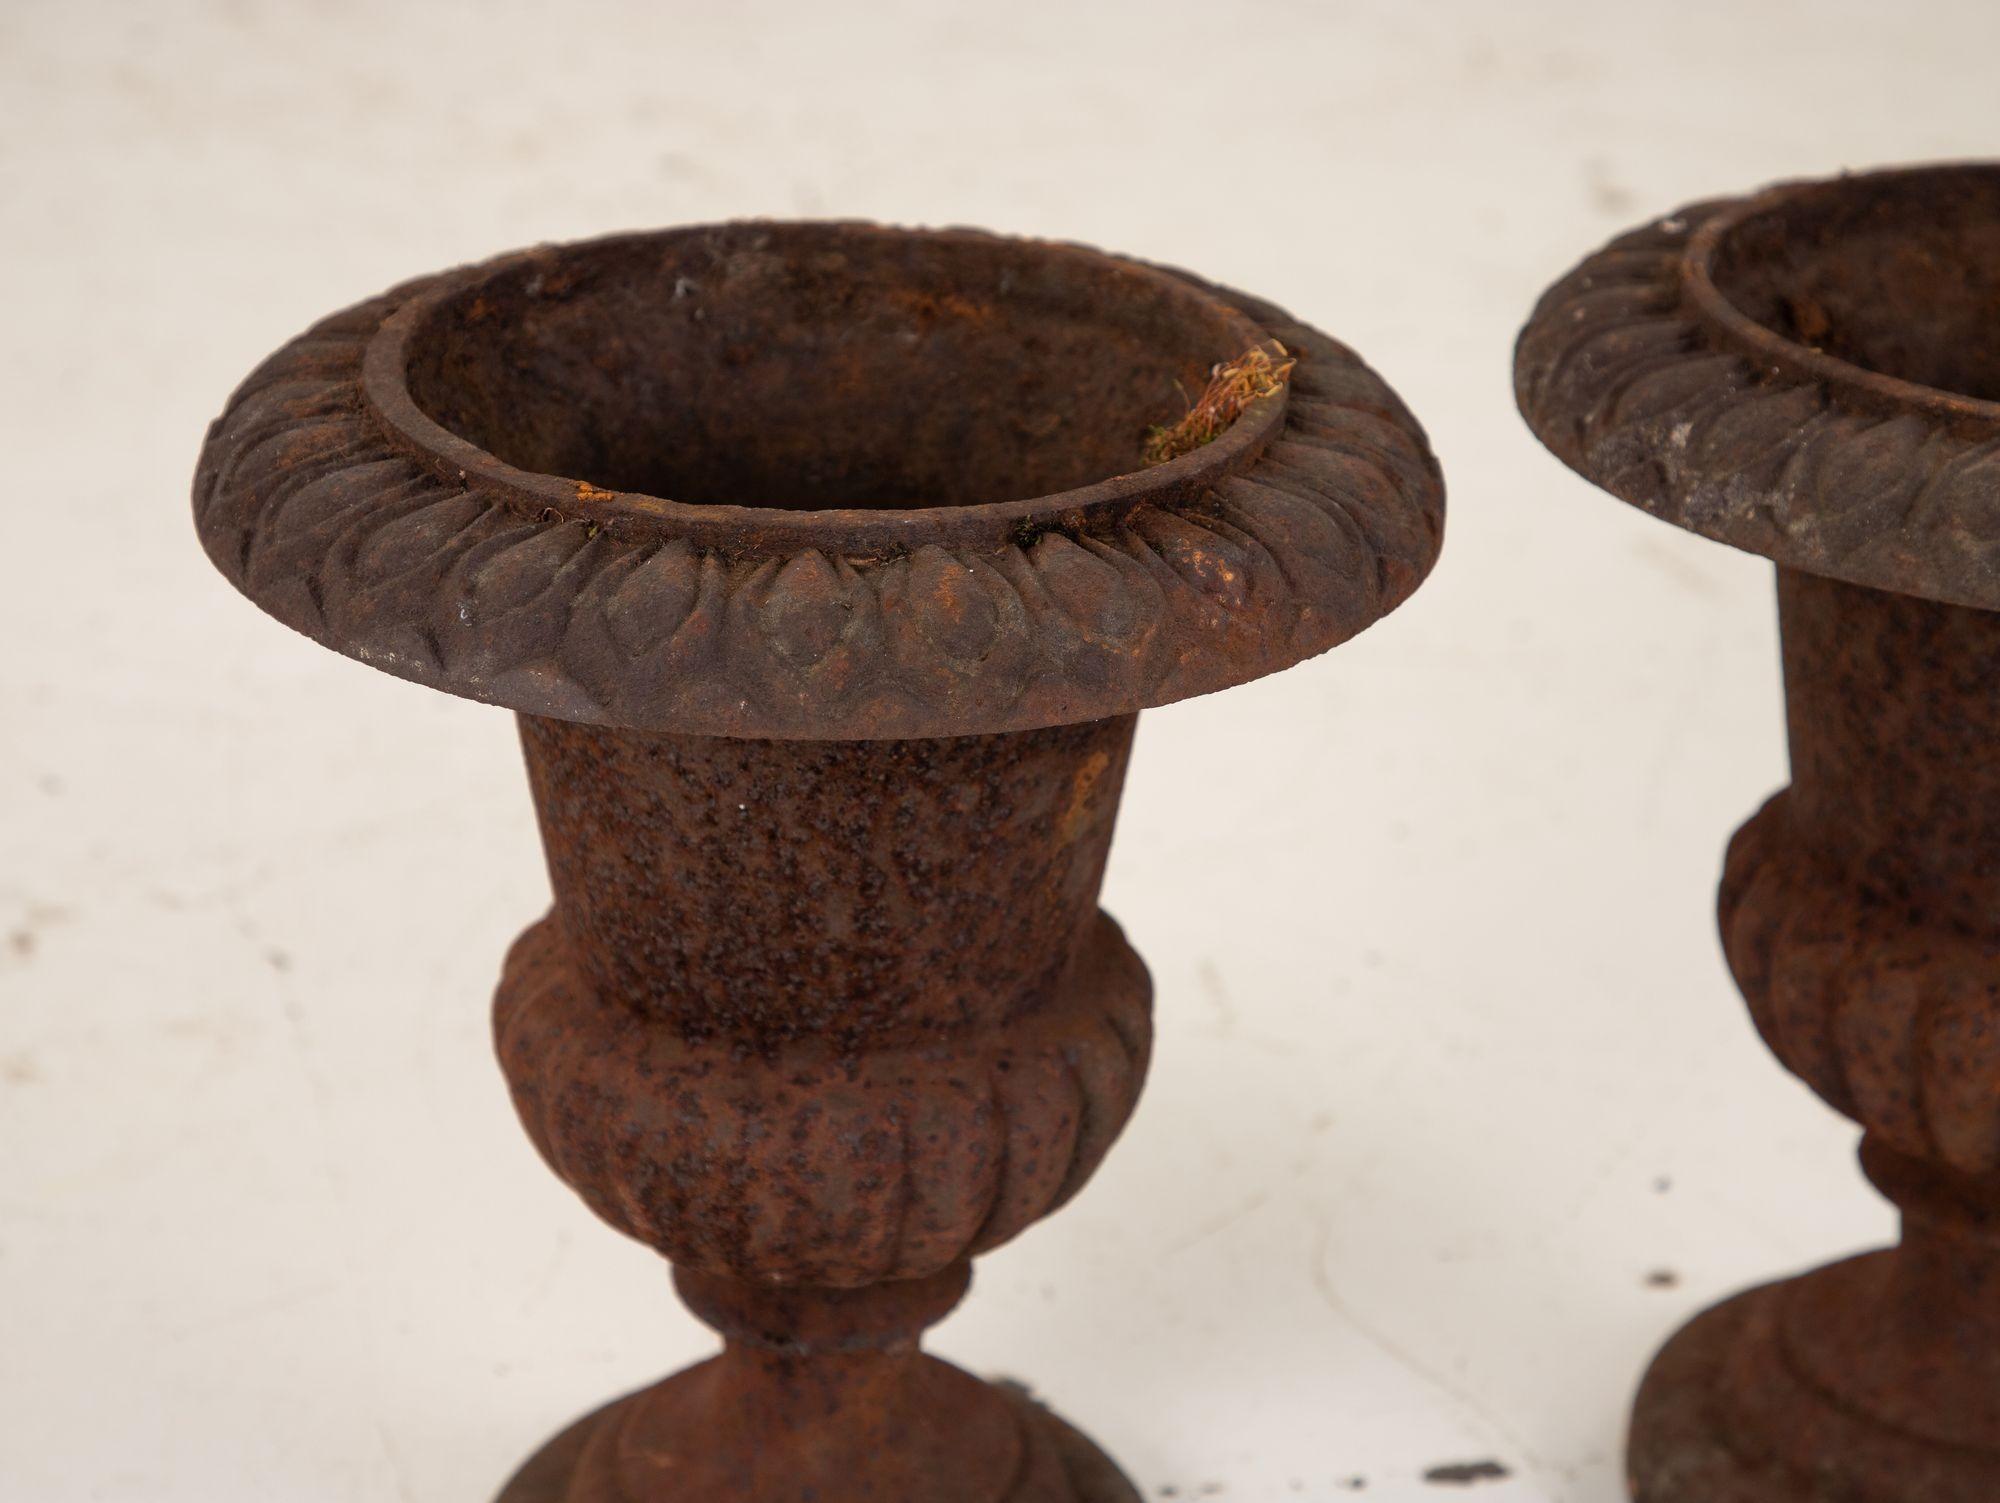 These cast iron urns are a beautiful example of French late 19th-century design. They have a timeless quality that makes them a perfect addition to any garden or outdoor space. The urns are made of solid cast iron, which gives them a substantial